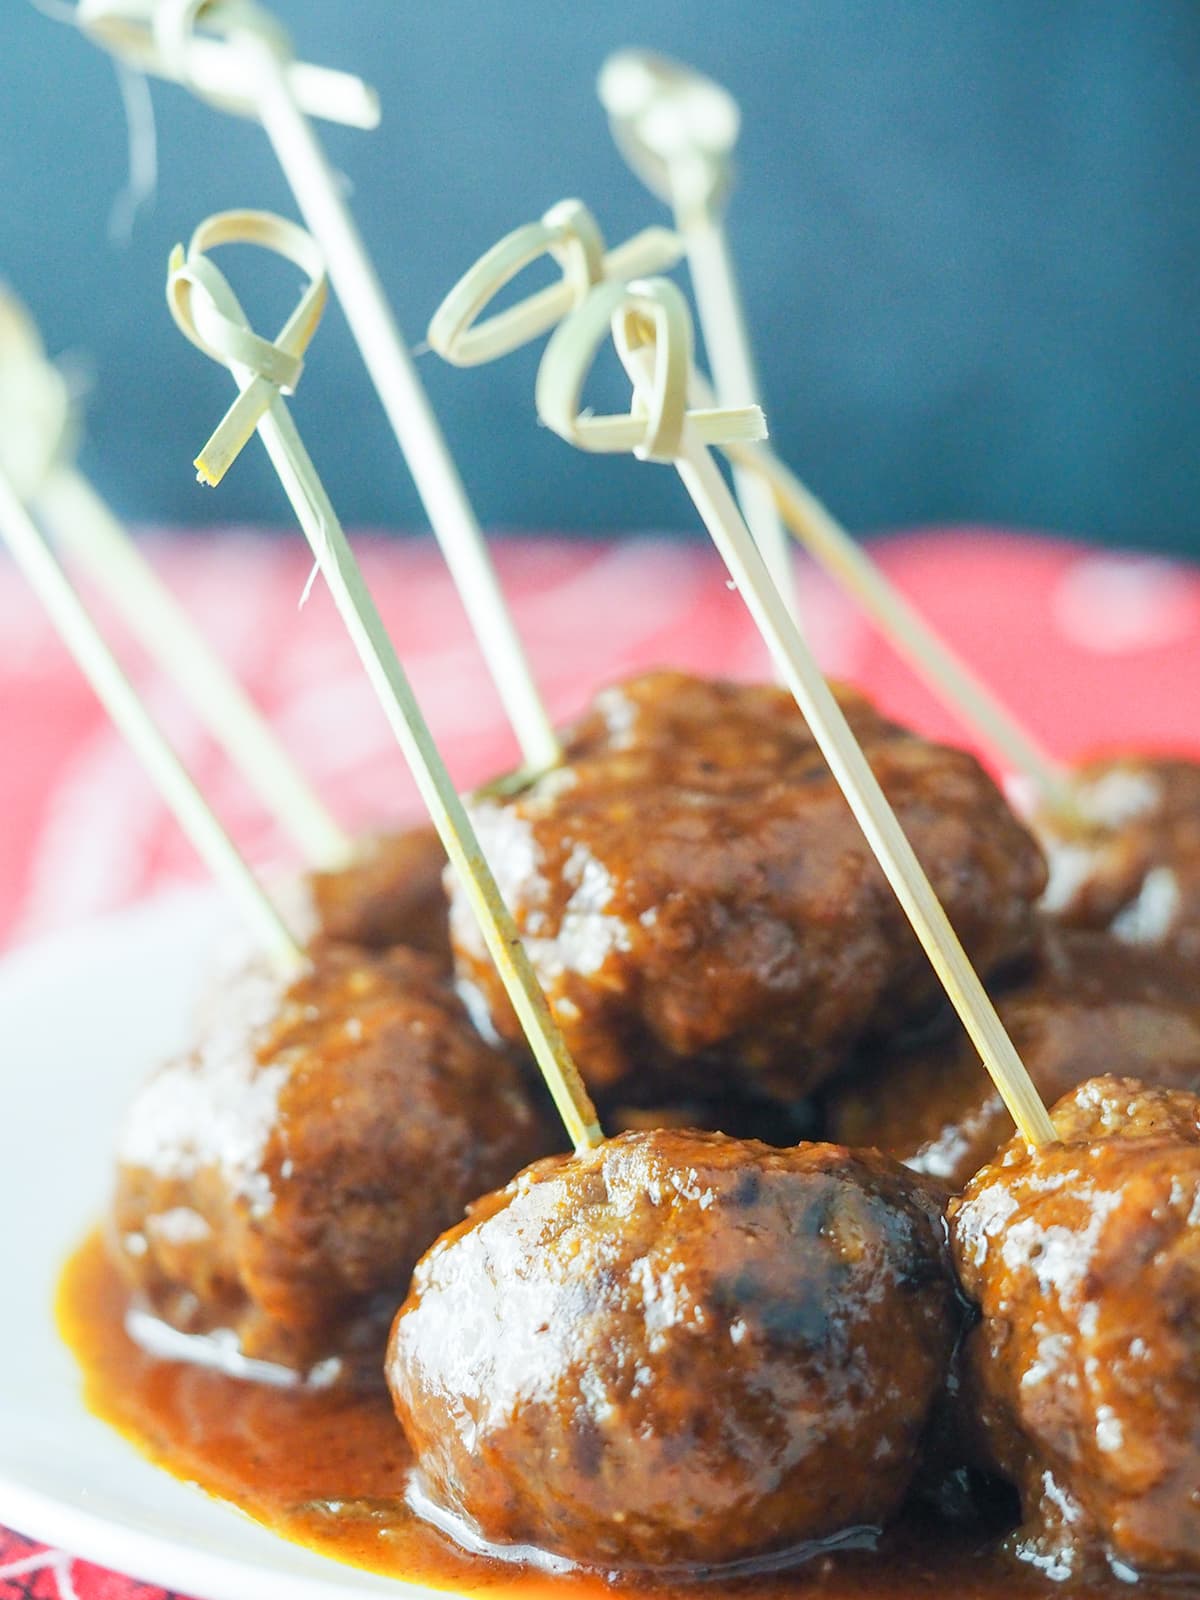 meatballs on plate on red background